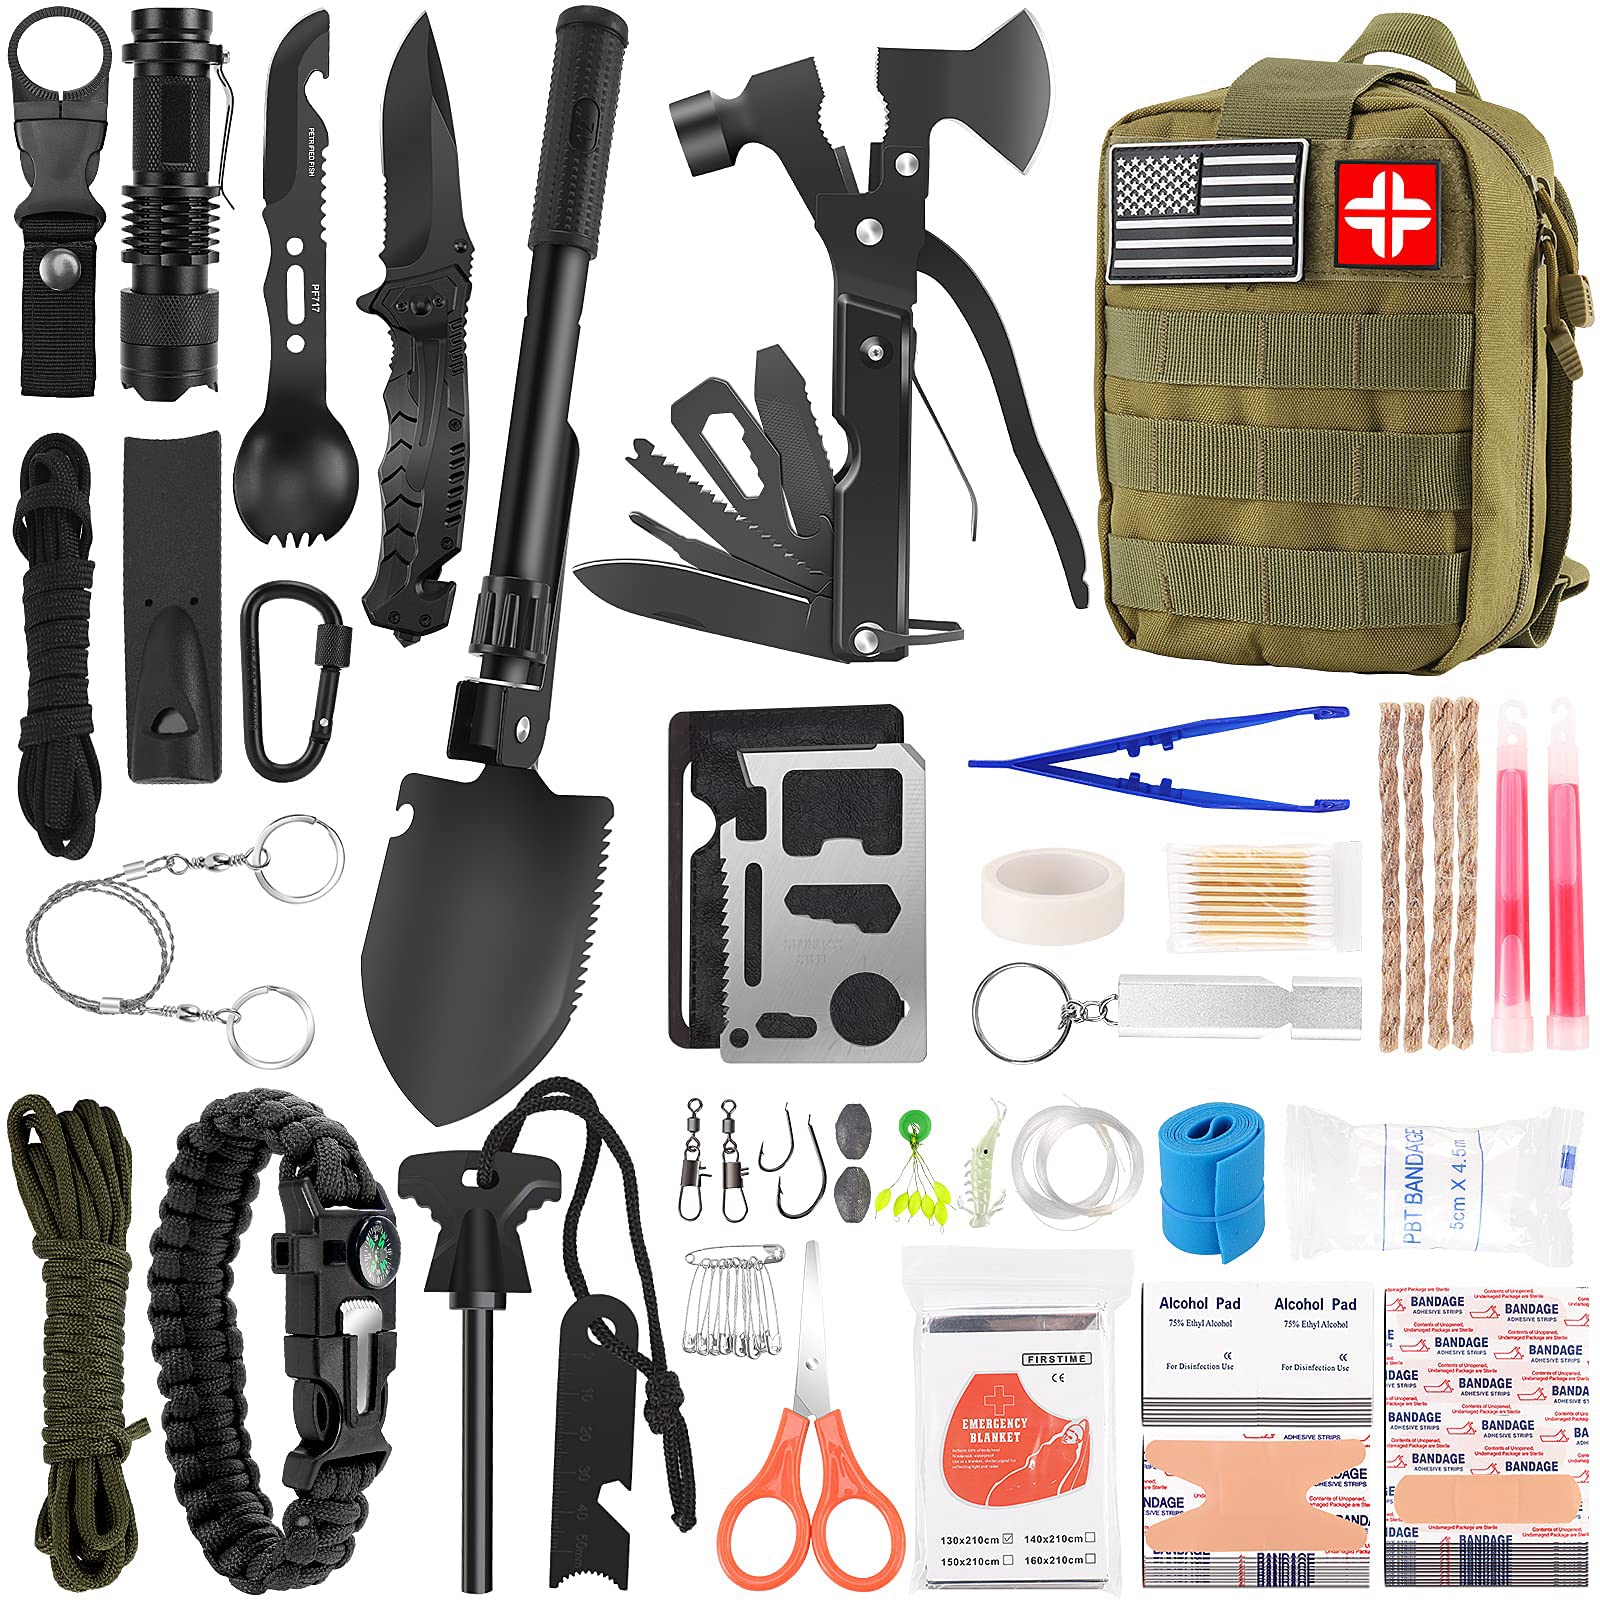 LUXMOM Survival Kit and First Aid Kit, 142Pcs Professional Survival Gear and Equipment with Molle Pouch, for Men Dad Husband Who Likes